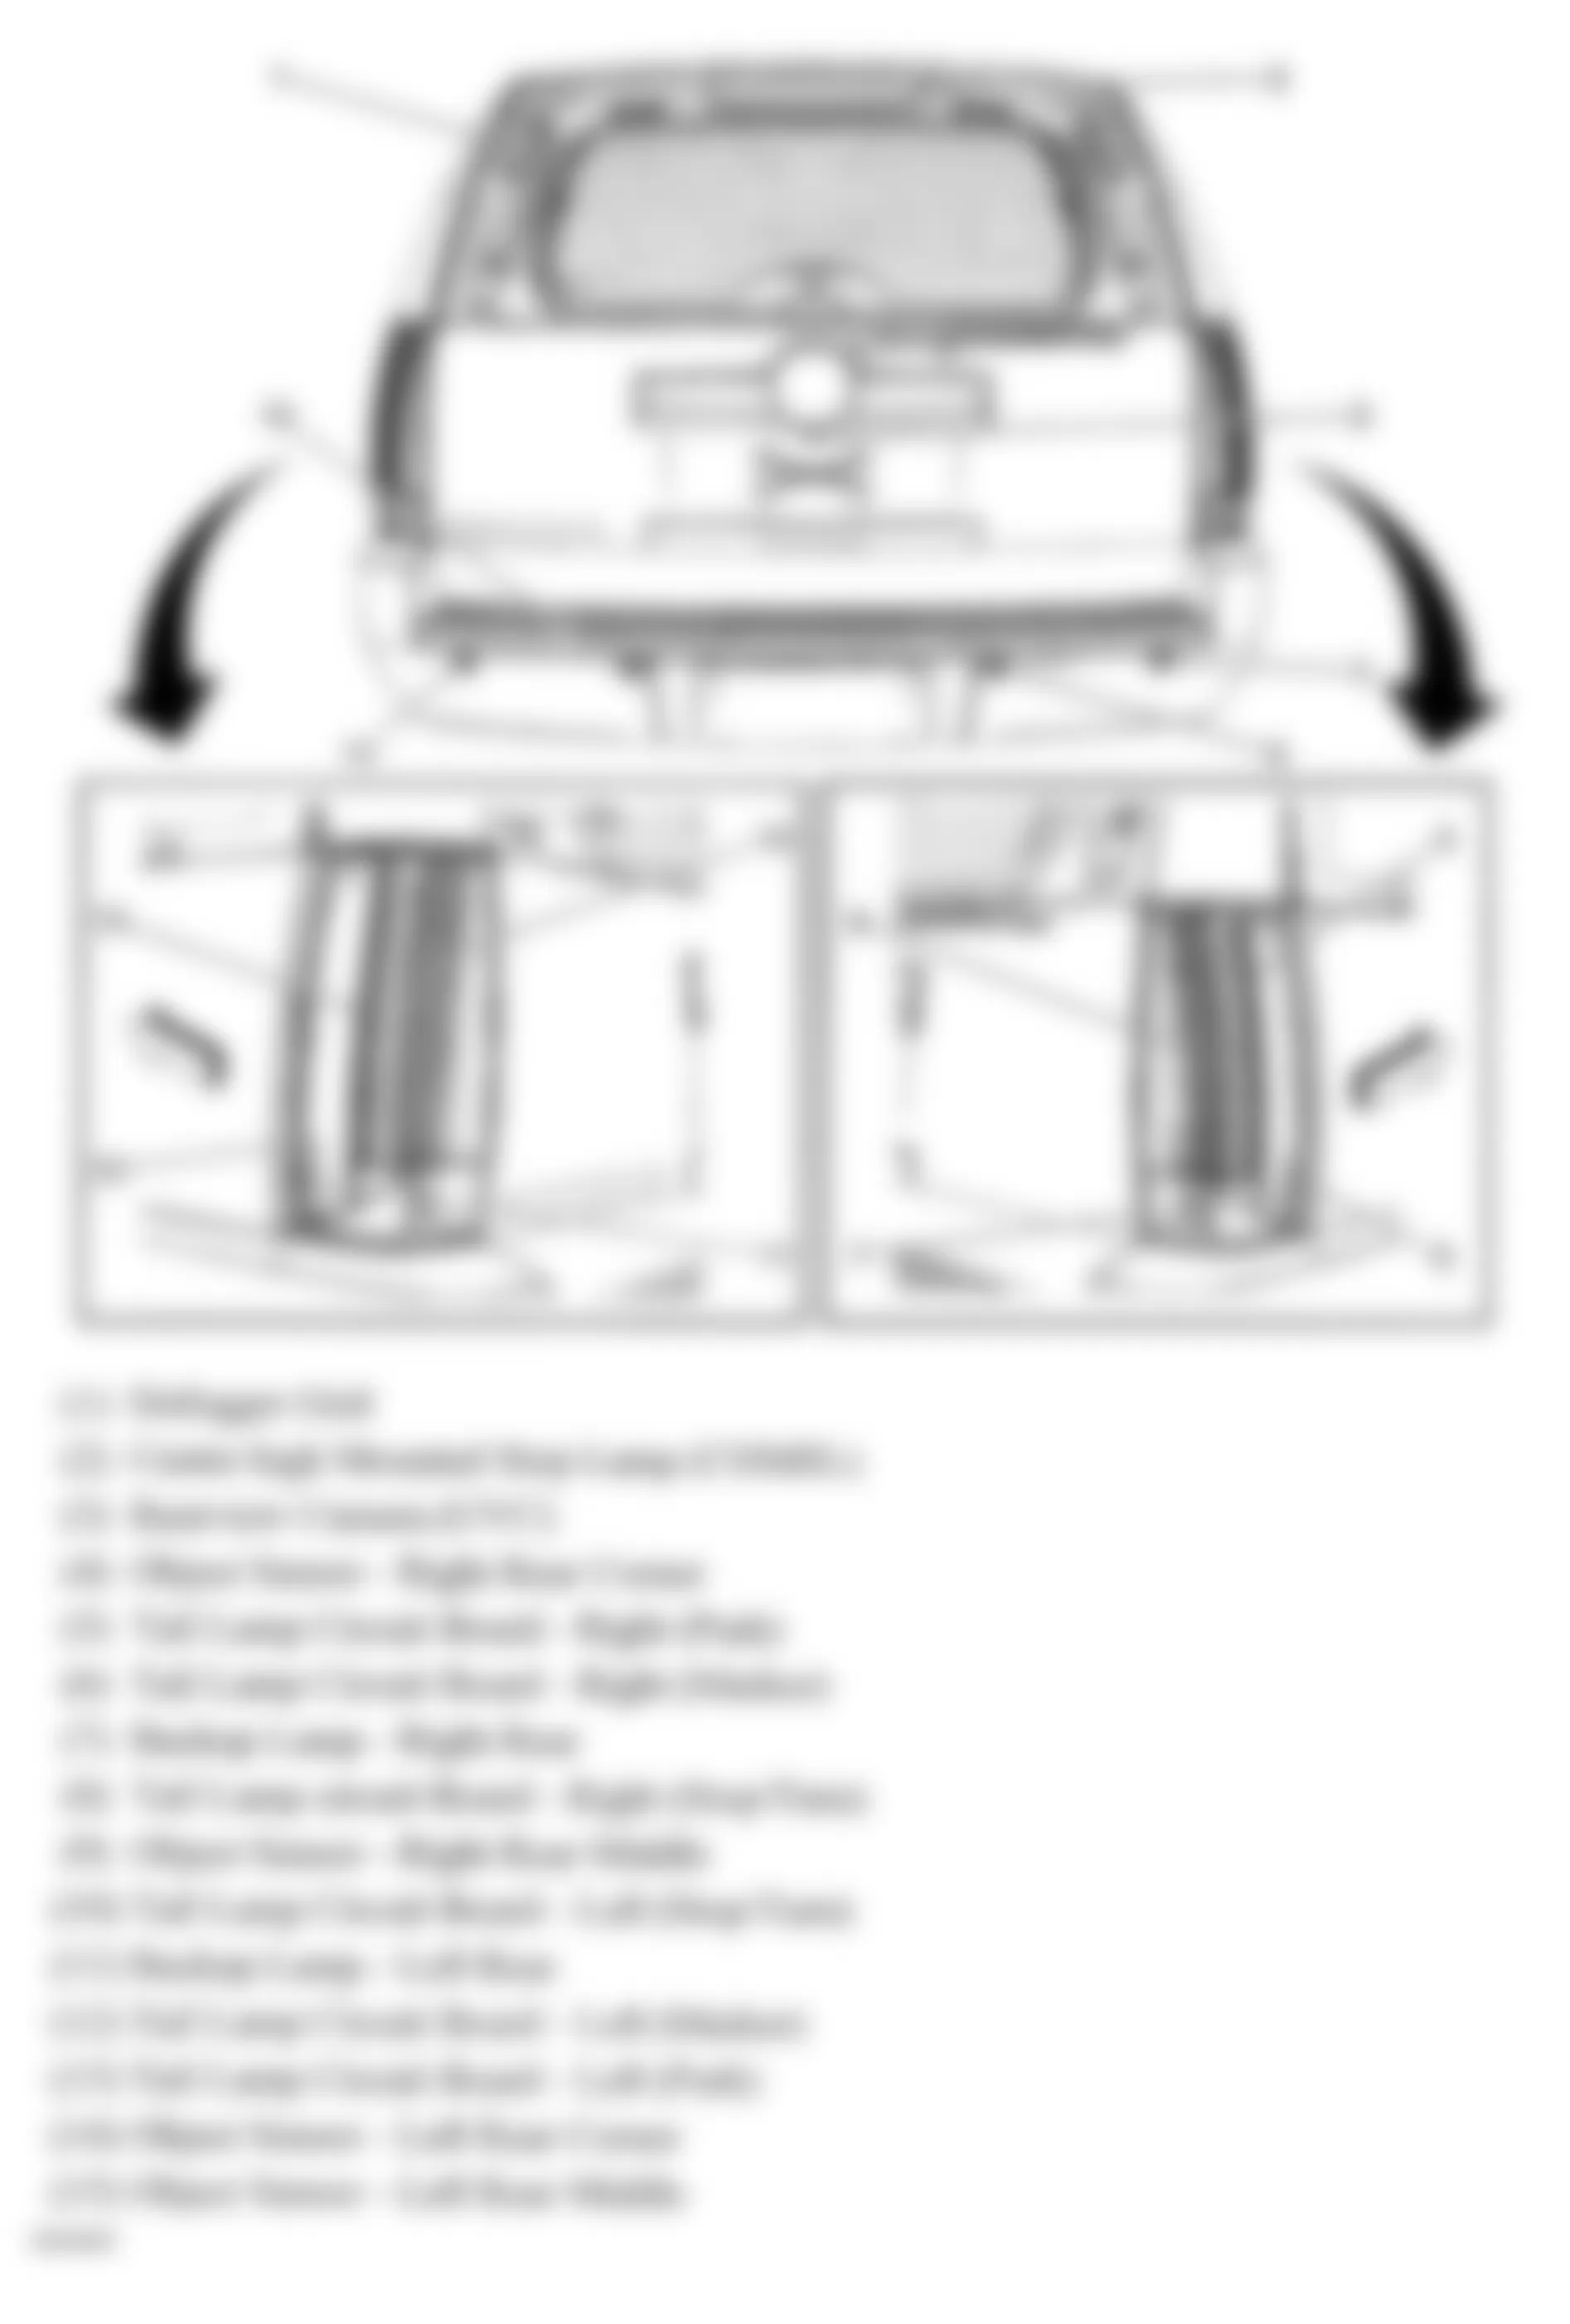 GMC Yukon XL K2500 2007 - Component Locations -  Rear Of Vehicle (Tahoe & Escalade W/One Piece Liftgate)